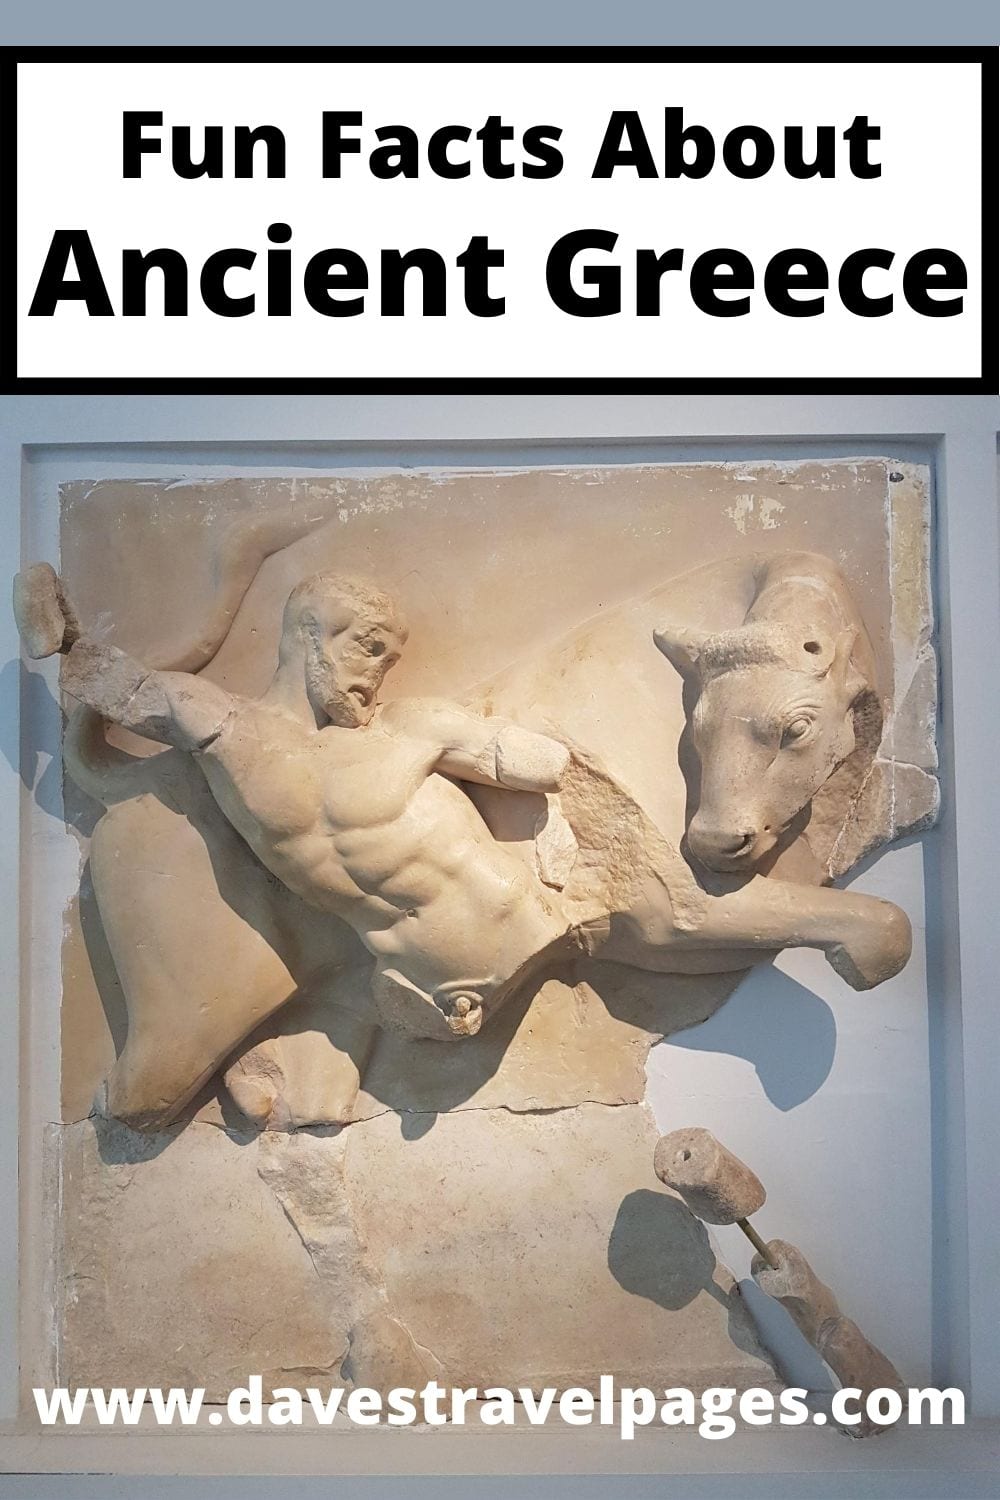 A collection of interesting and fun facts about Ancient Greece